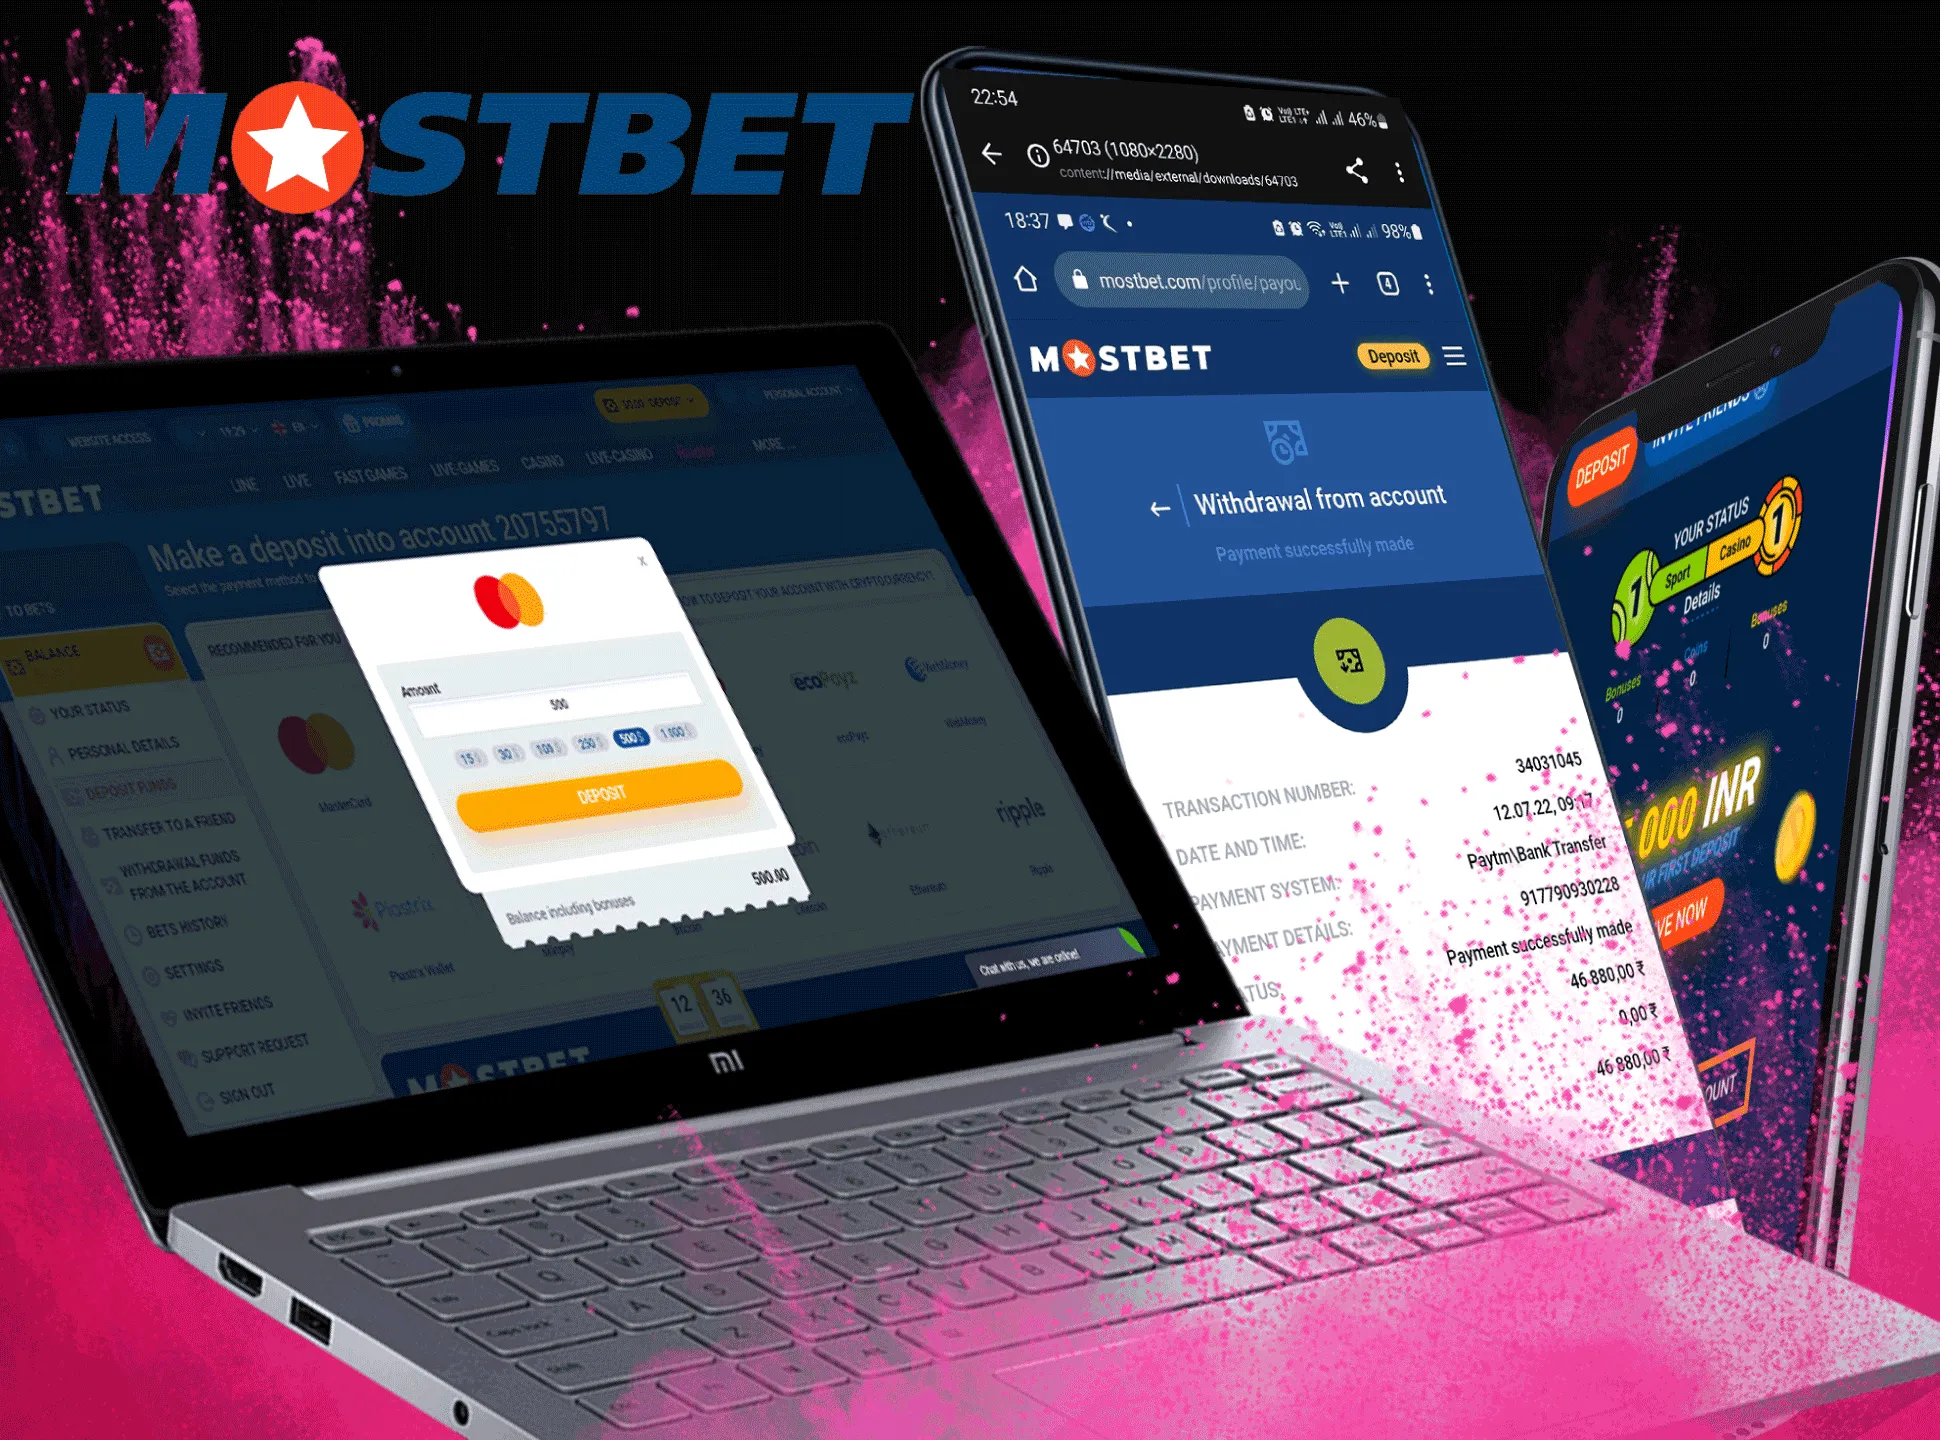 Only verified players can withdraw money from Mostbet.